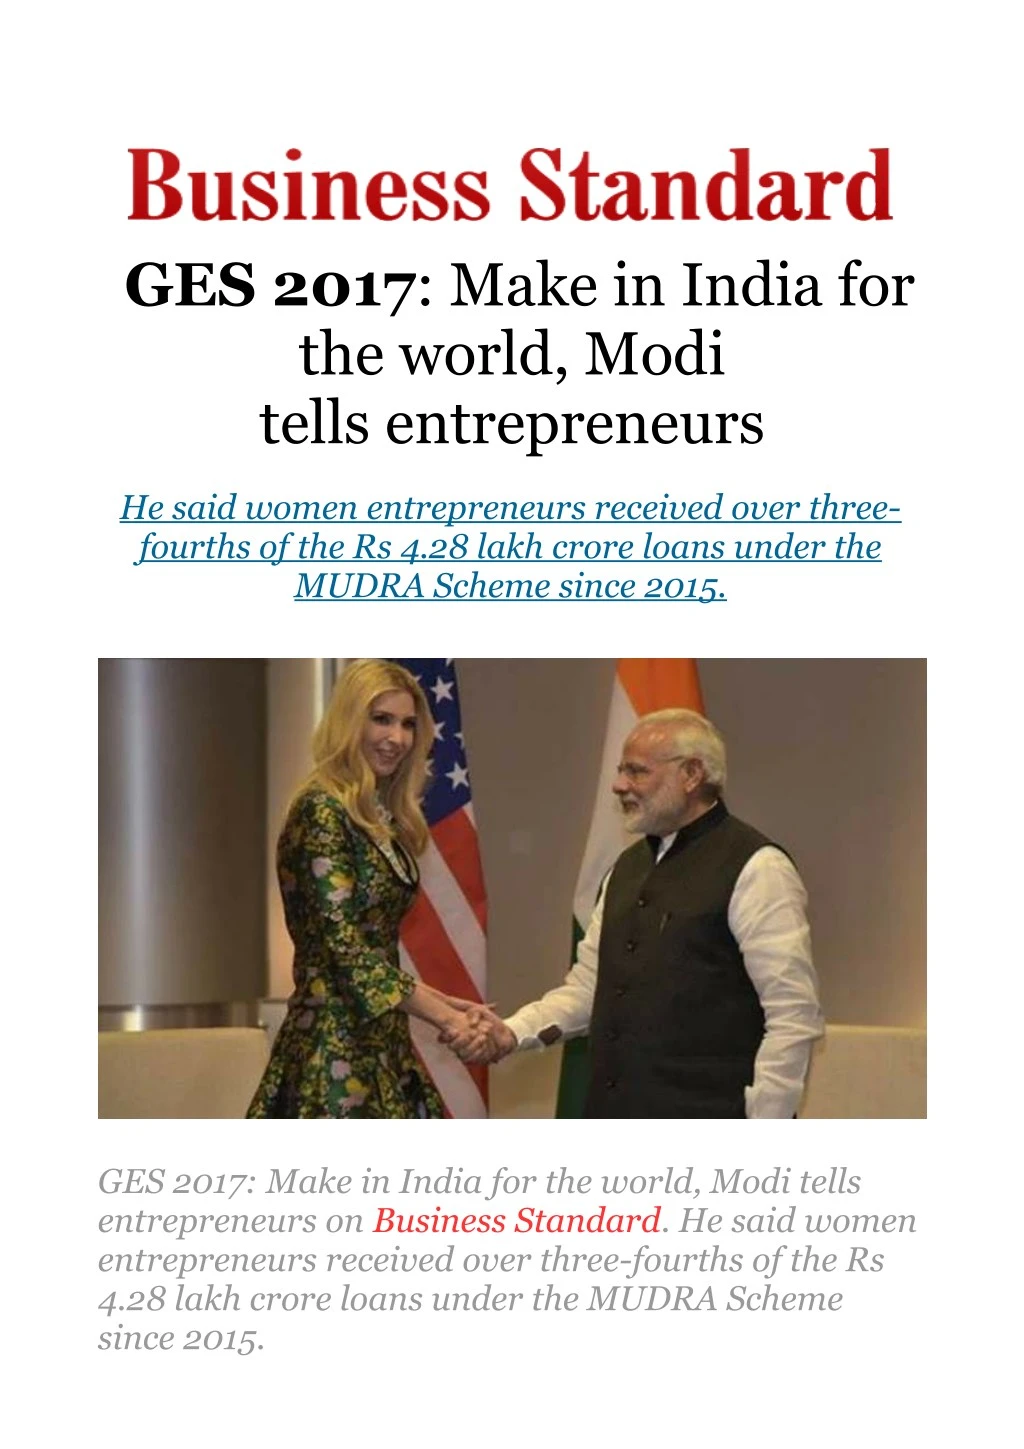 ges 2017 make in india for the world modi tells